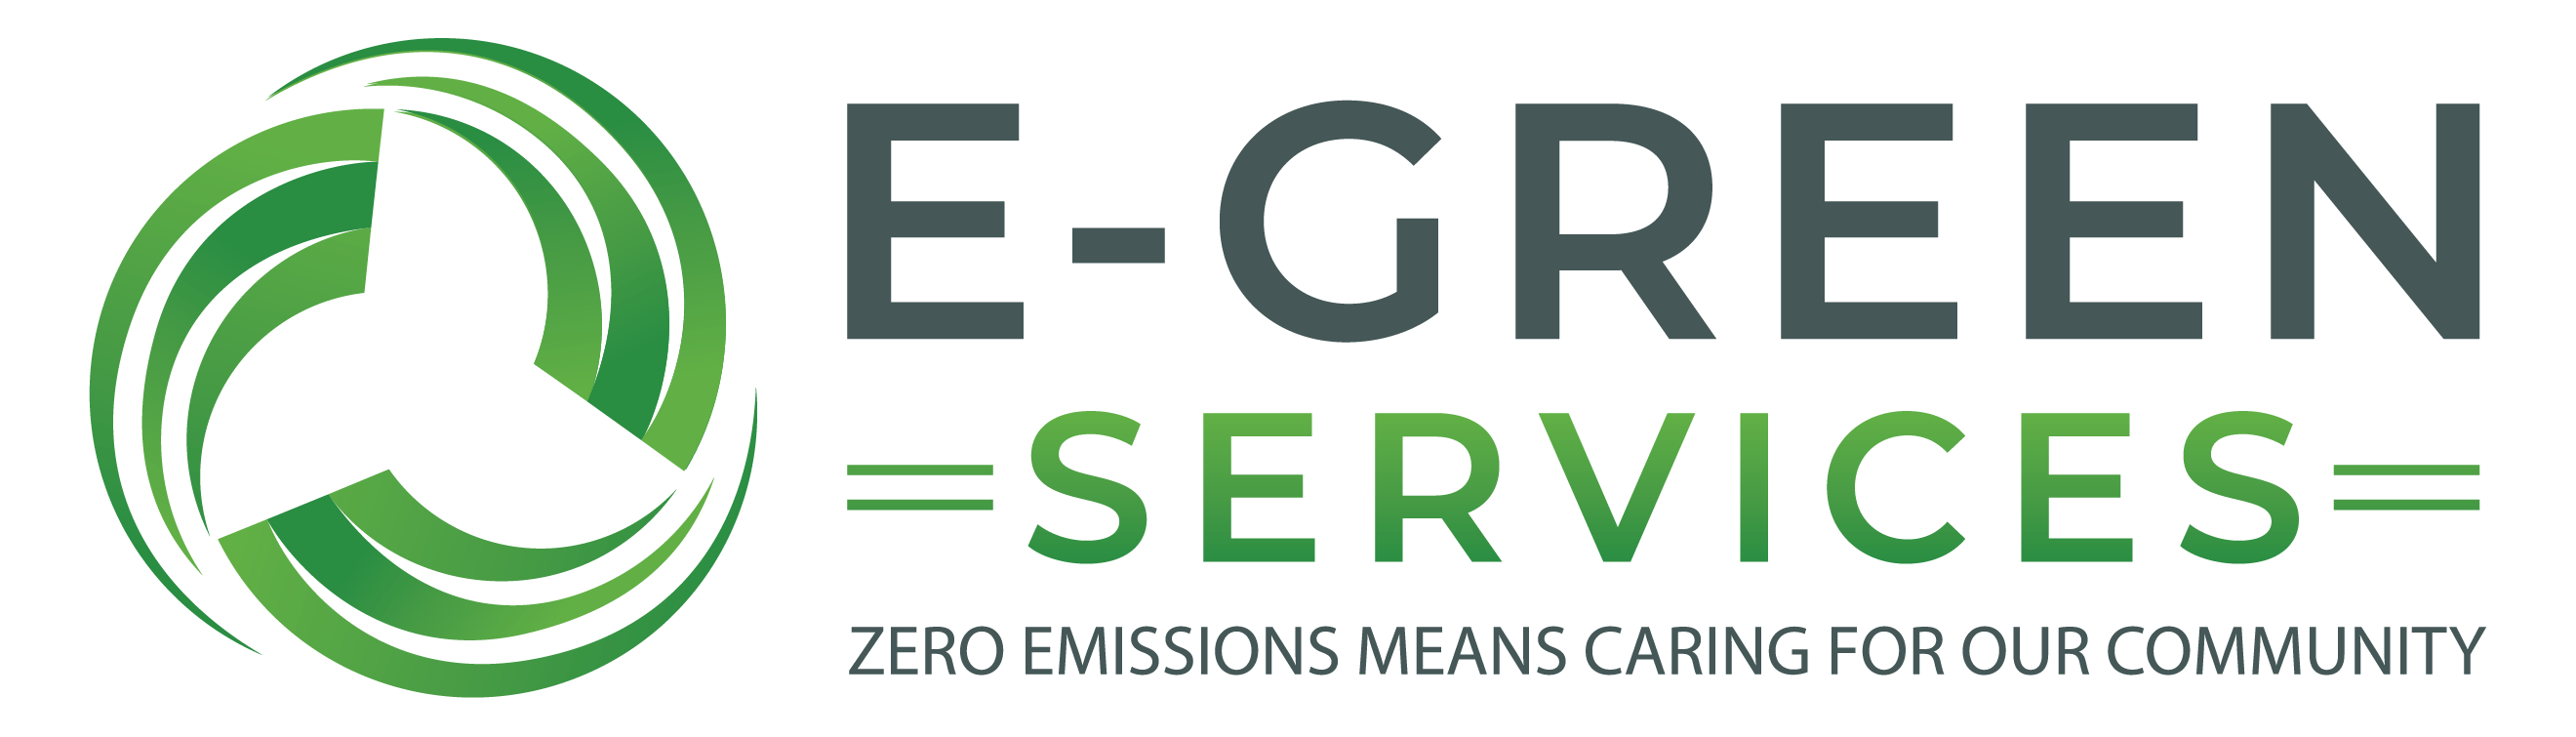 egreen services grand rapids lawn care and landscaping